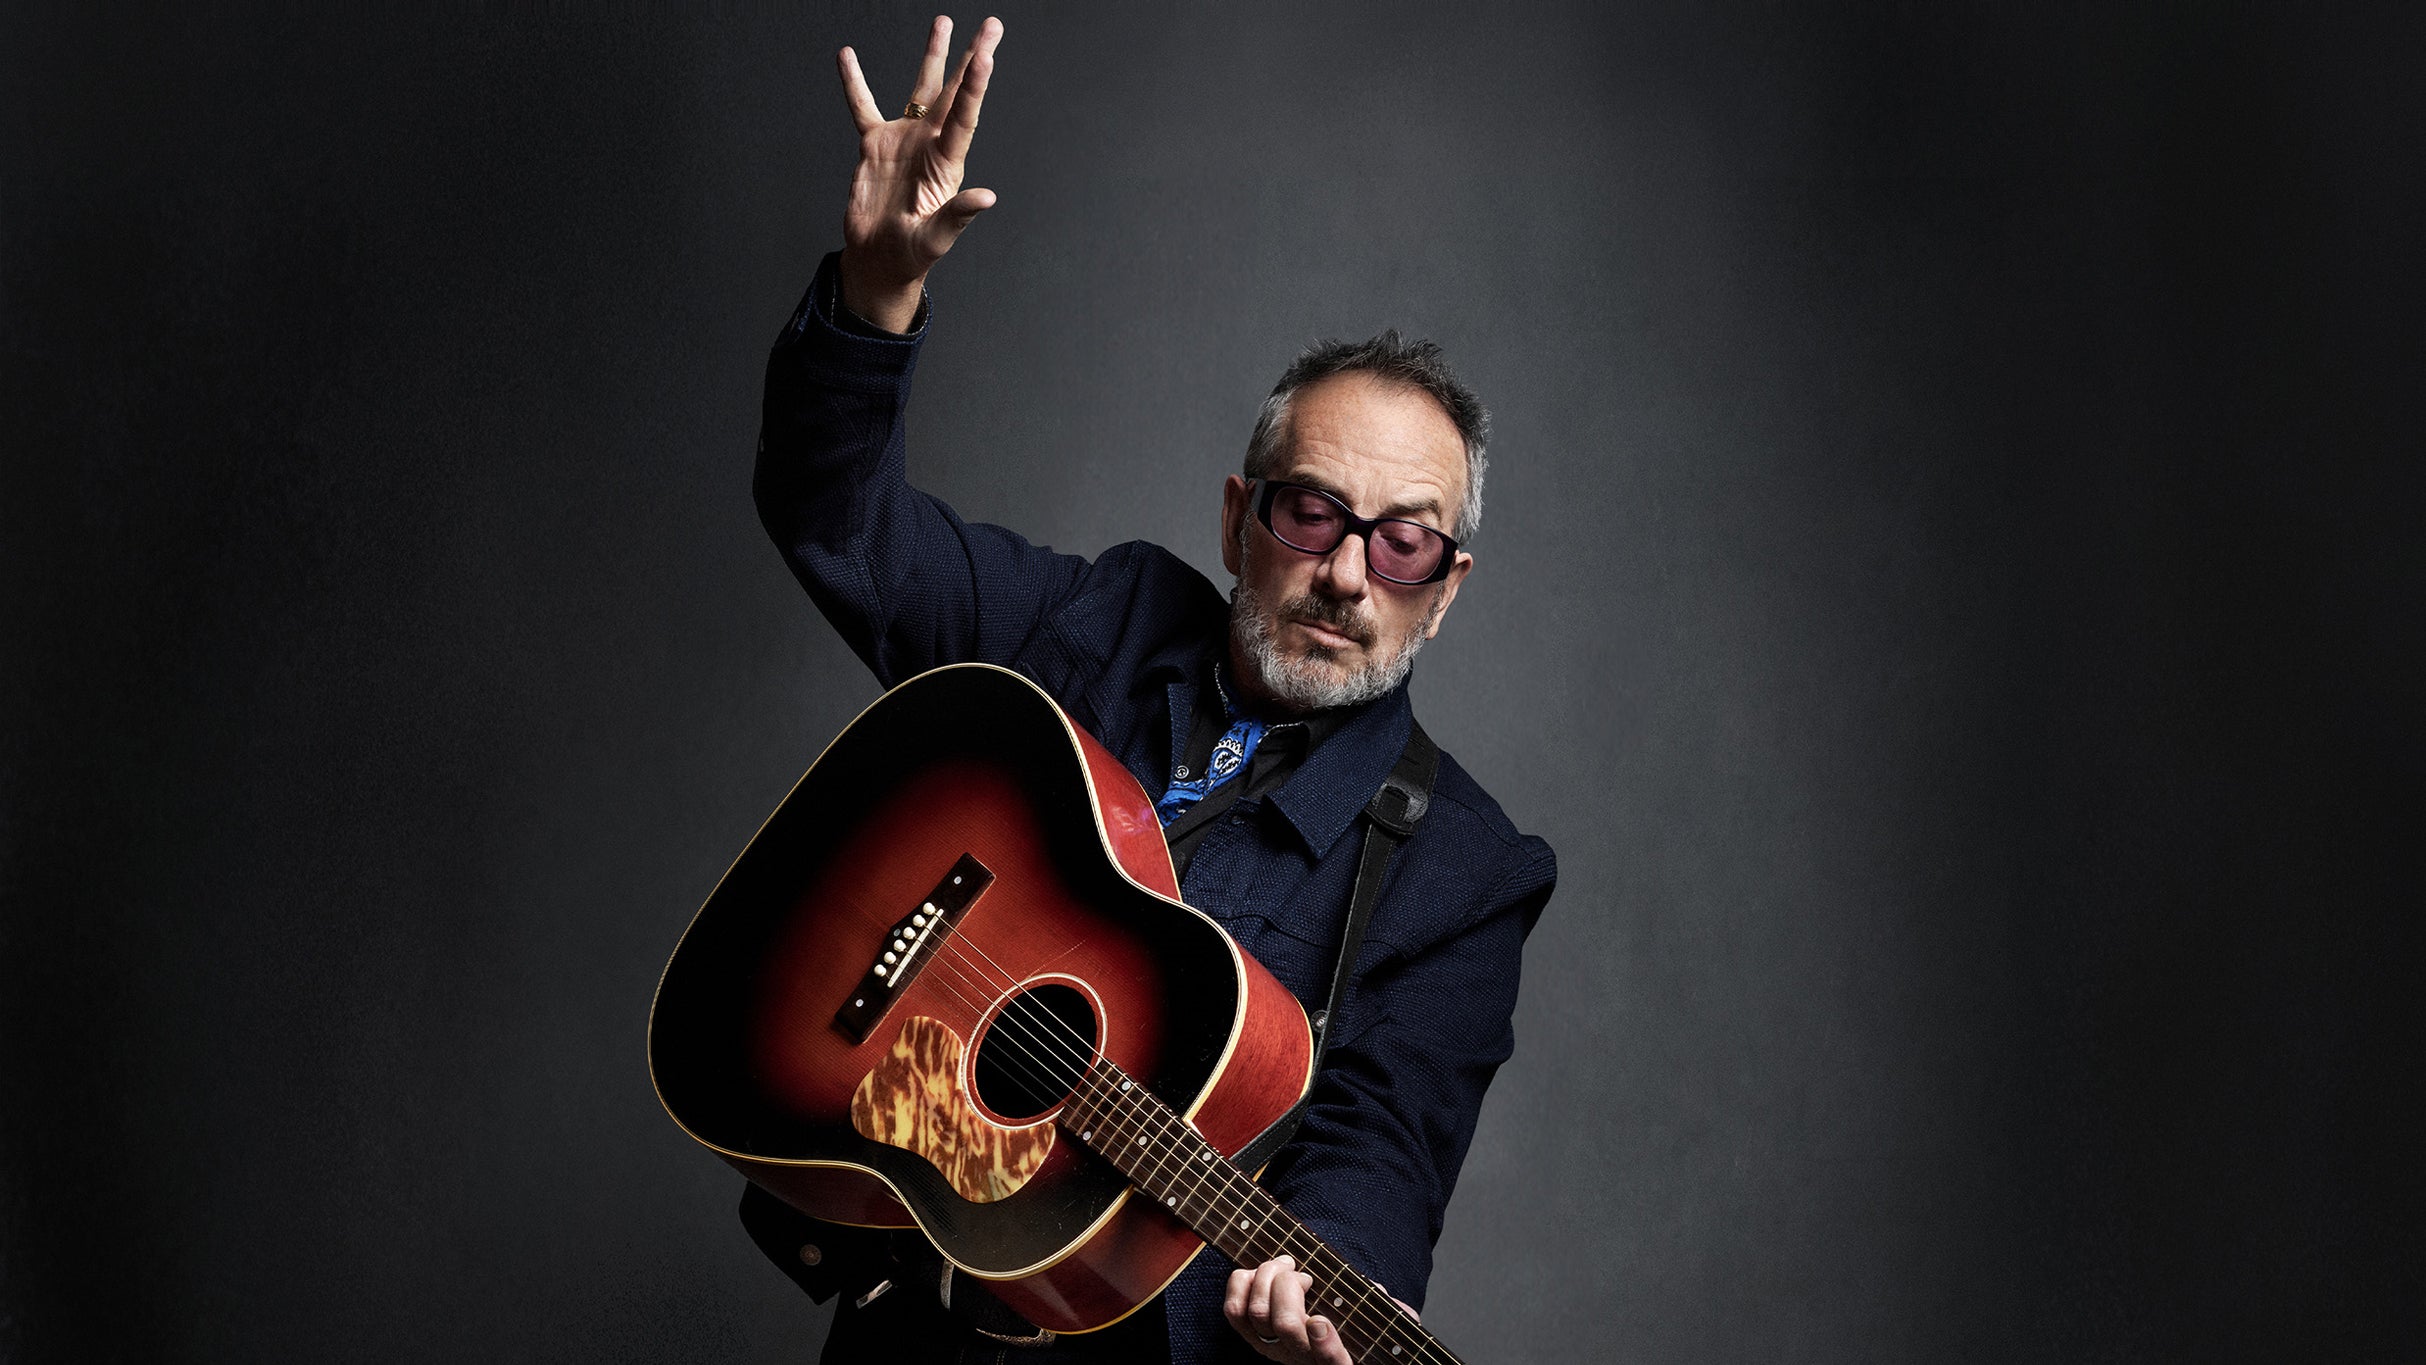 Elvis Costello & Steve Nieve (4 Day Ticket) in Dublin promo photo for Past Purchaser presale offer code